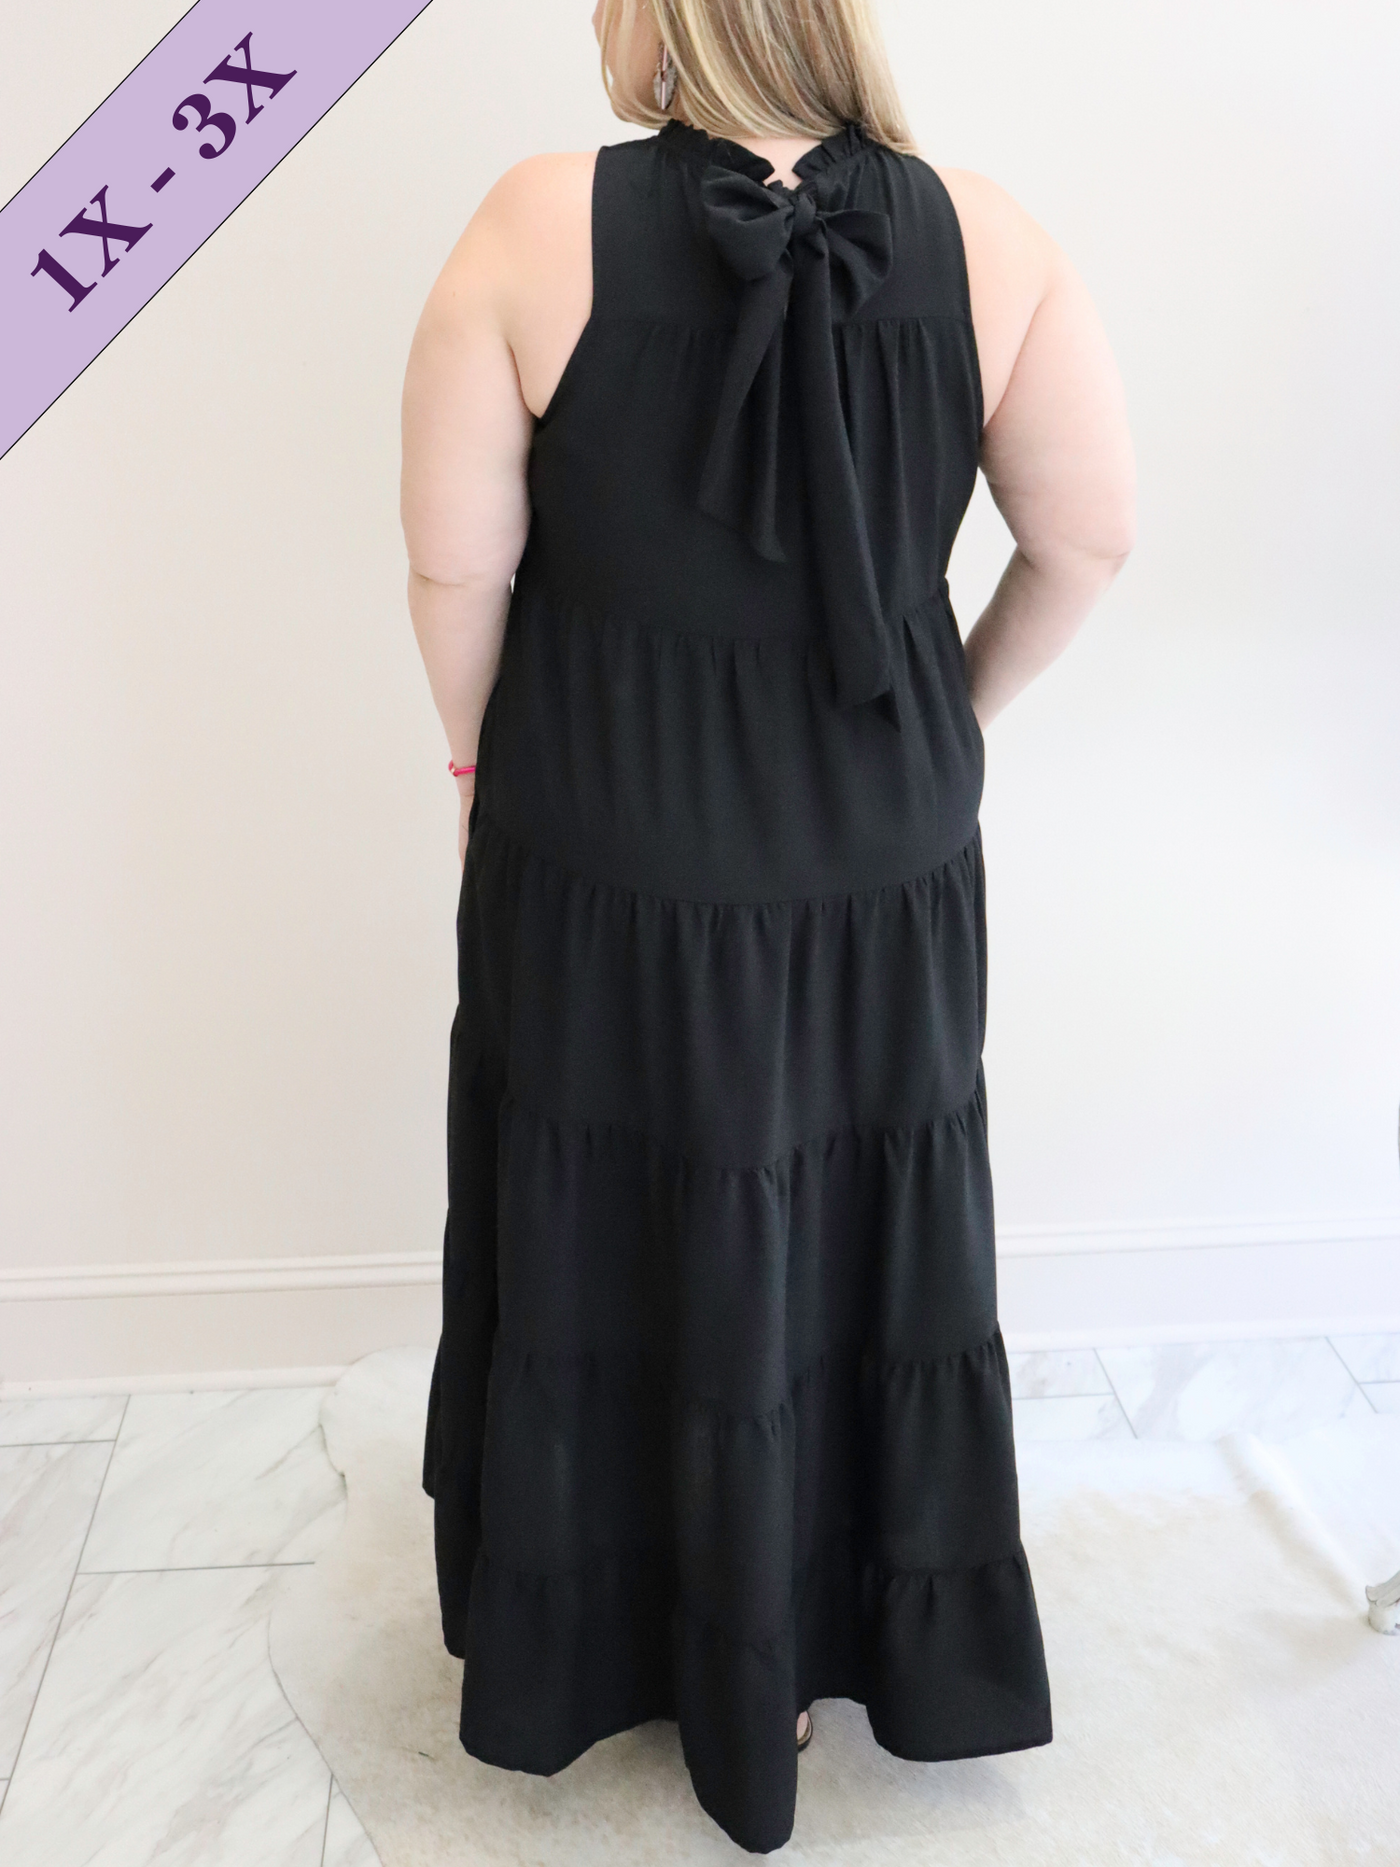 Hailey & Co Crinkles Halter Maxi Dress up close back view.